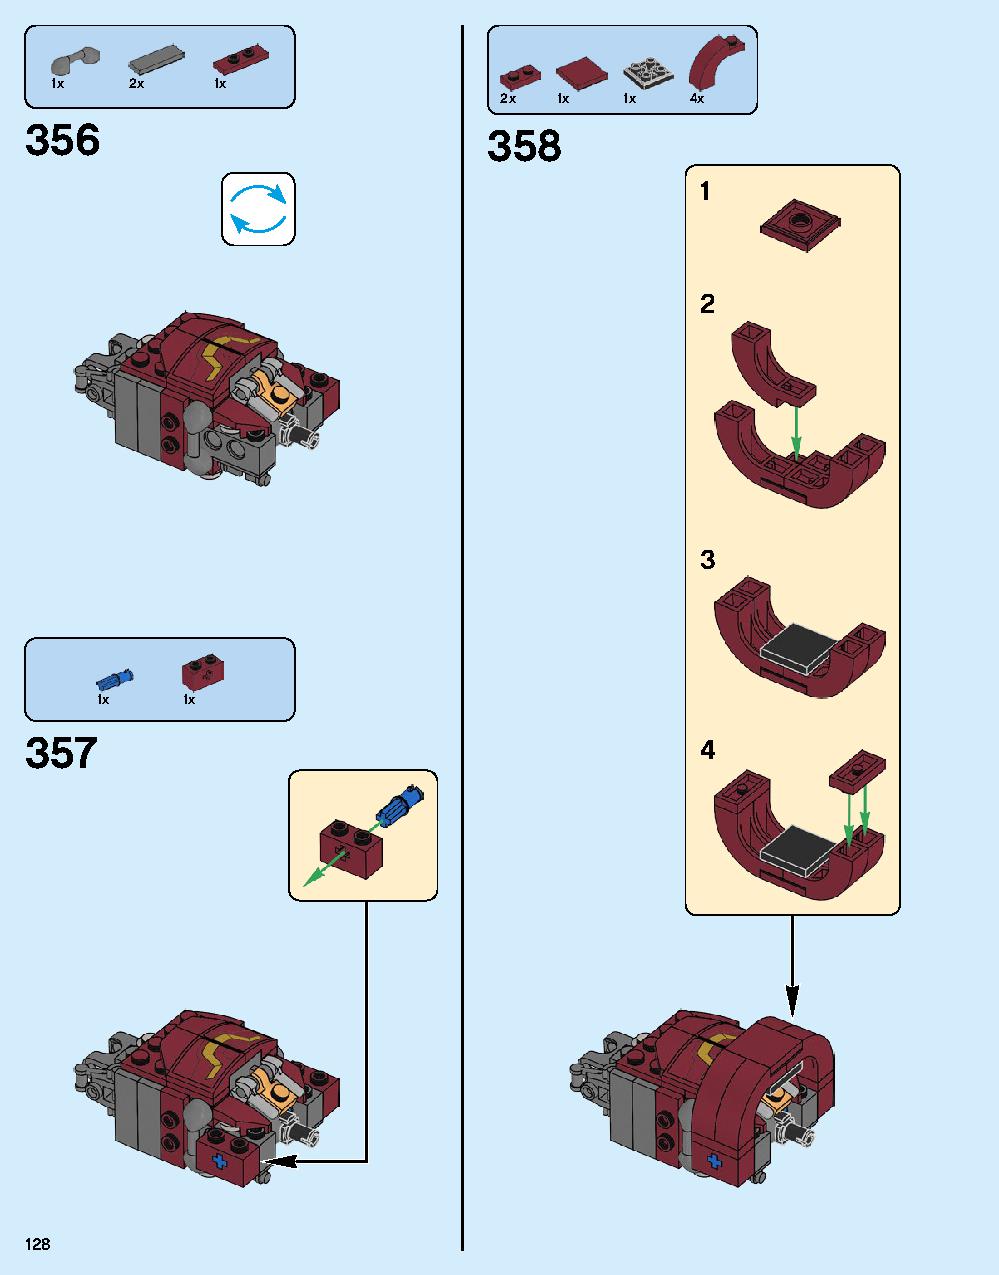 The Hulkbuster: Ultron Edition 76105 LEGO information LEGO instructions 128 page